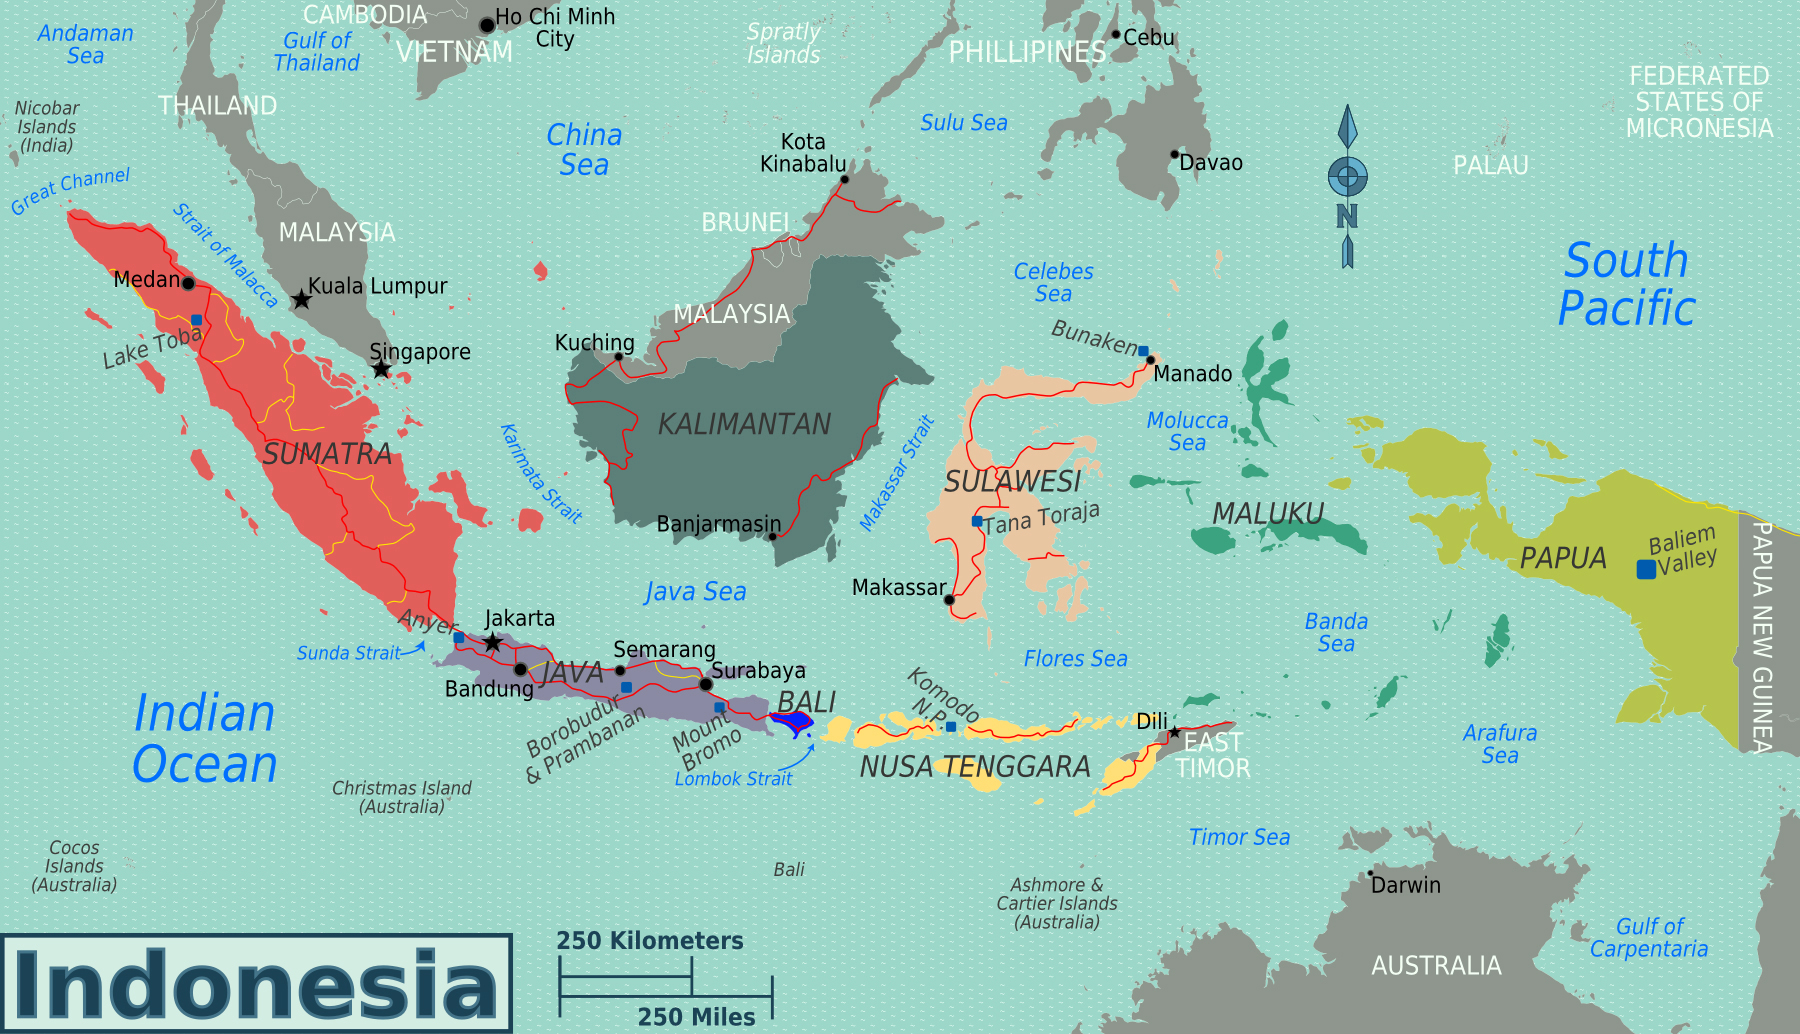 Large Regions Map Of Indonesia Indonesia Asia Mapsland Maps Of